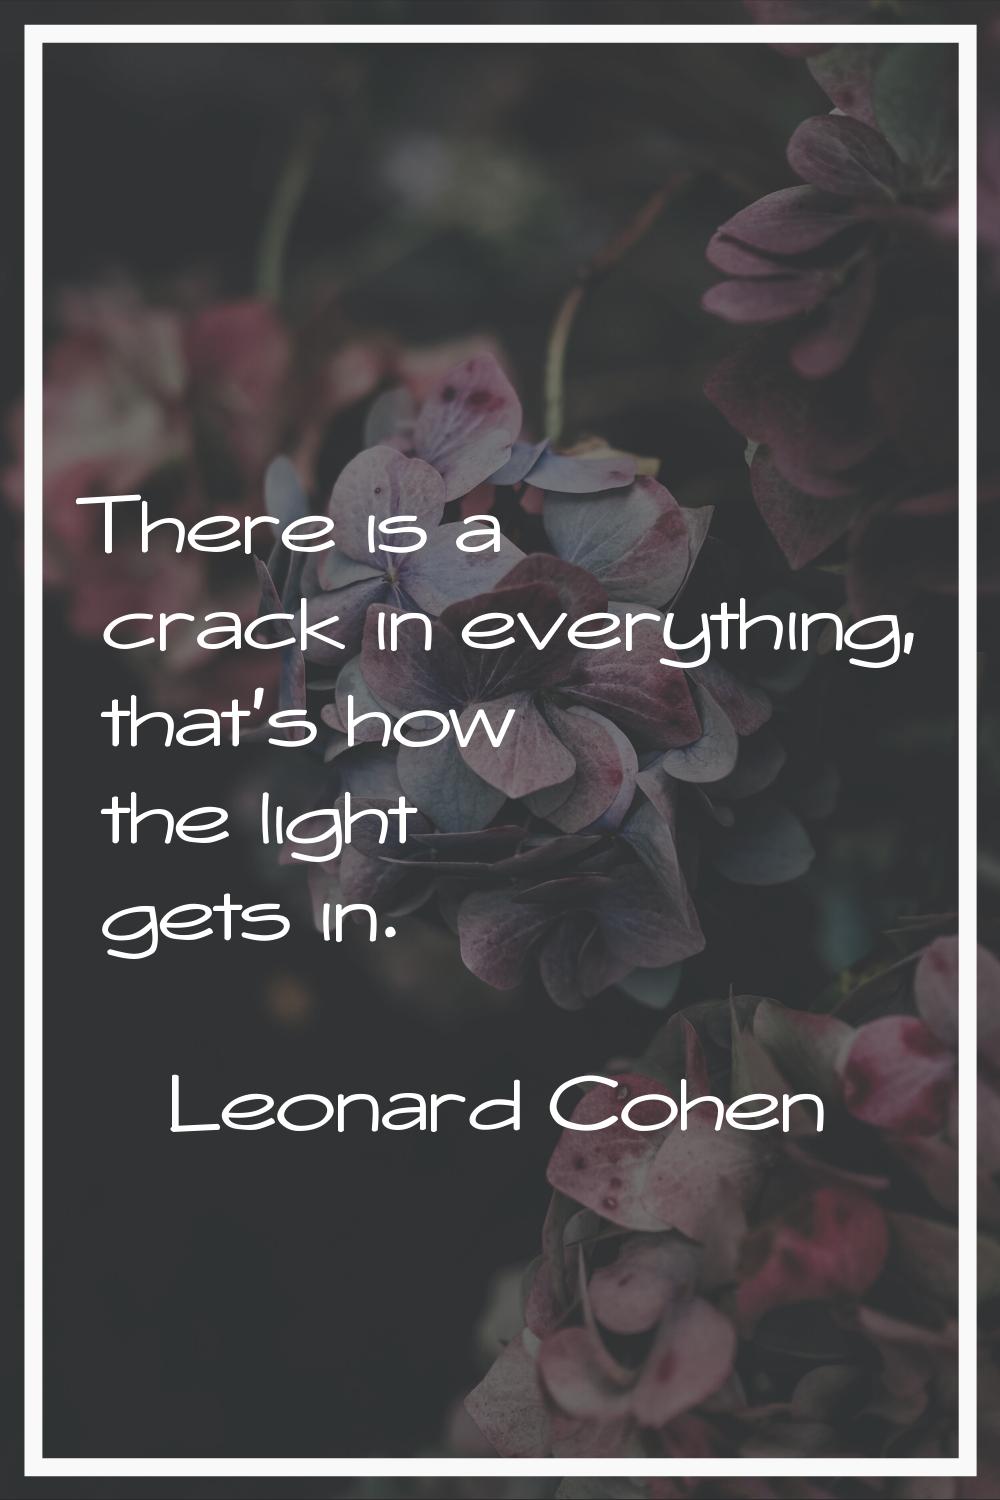 There is a crack in everything, that's how the light gets in.